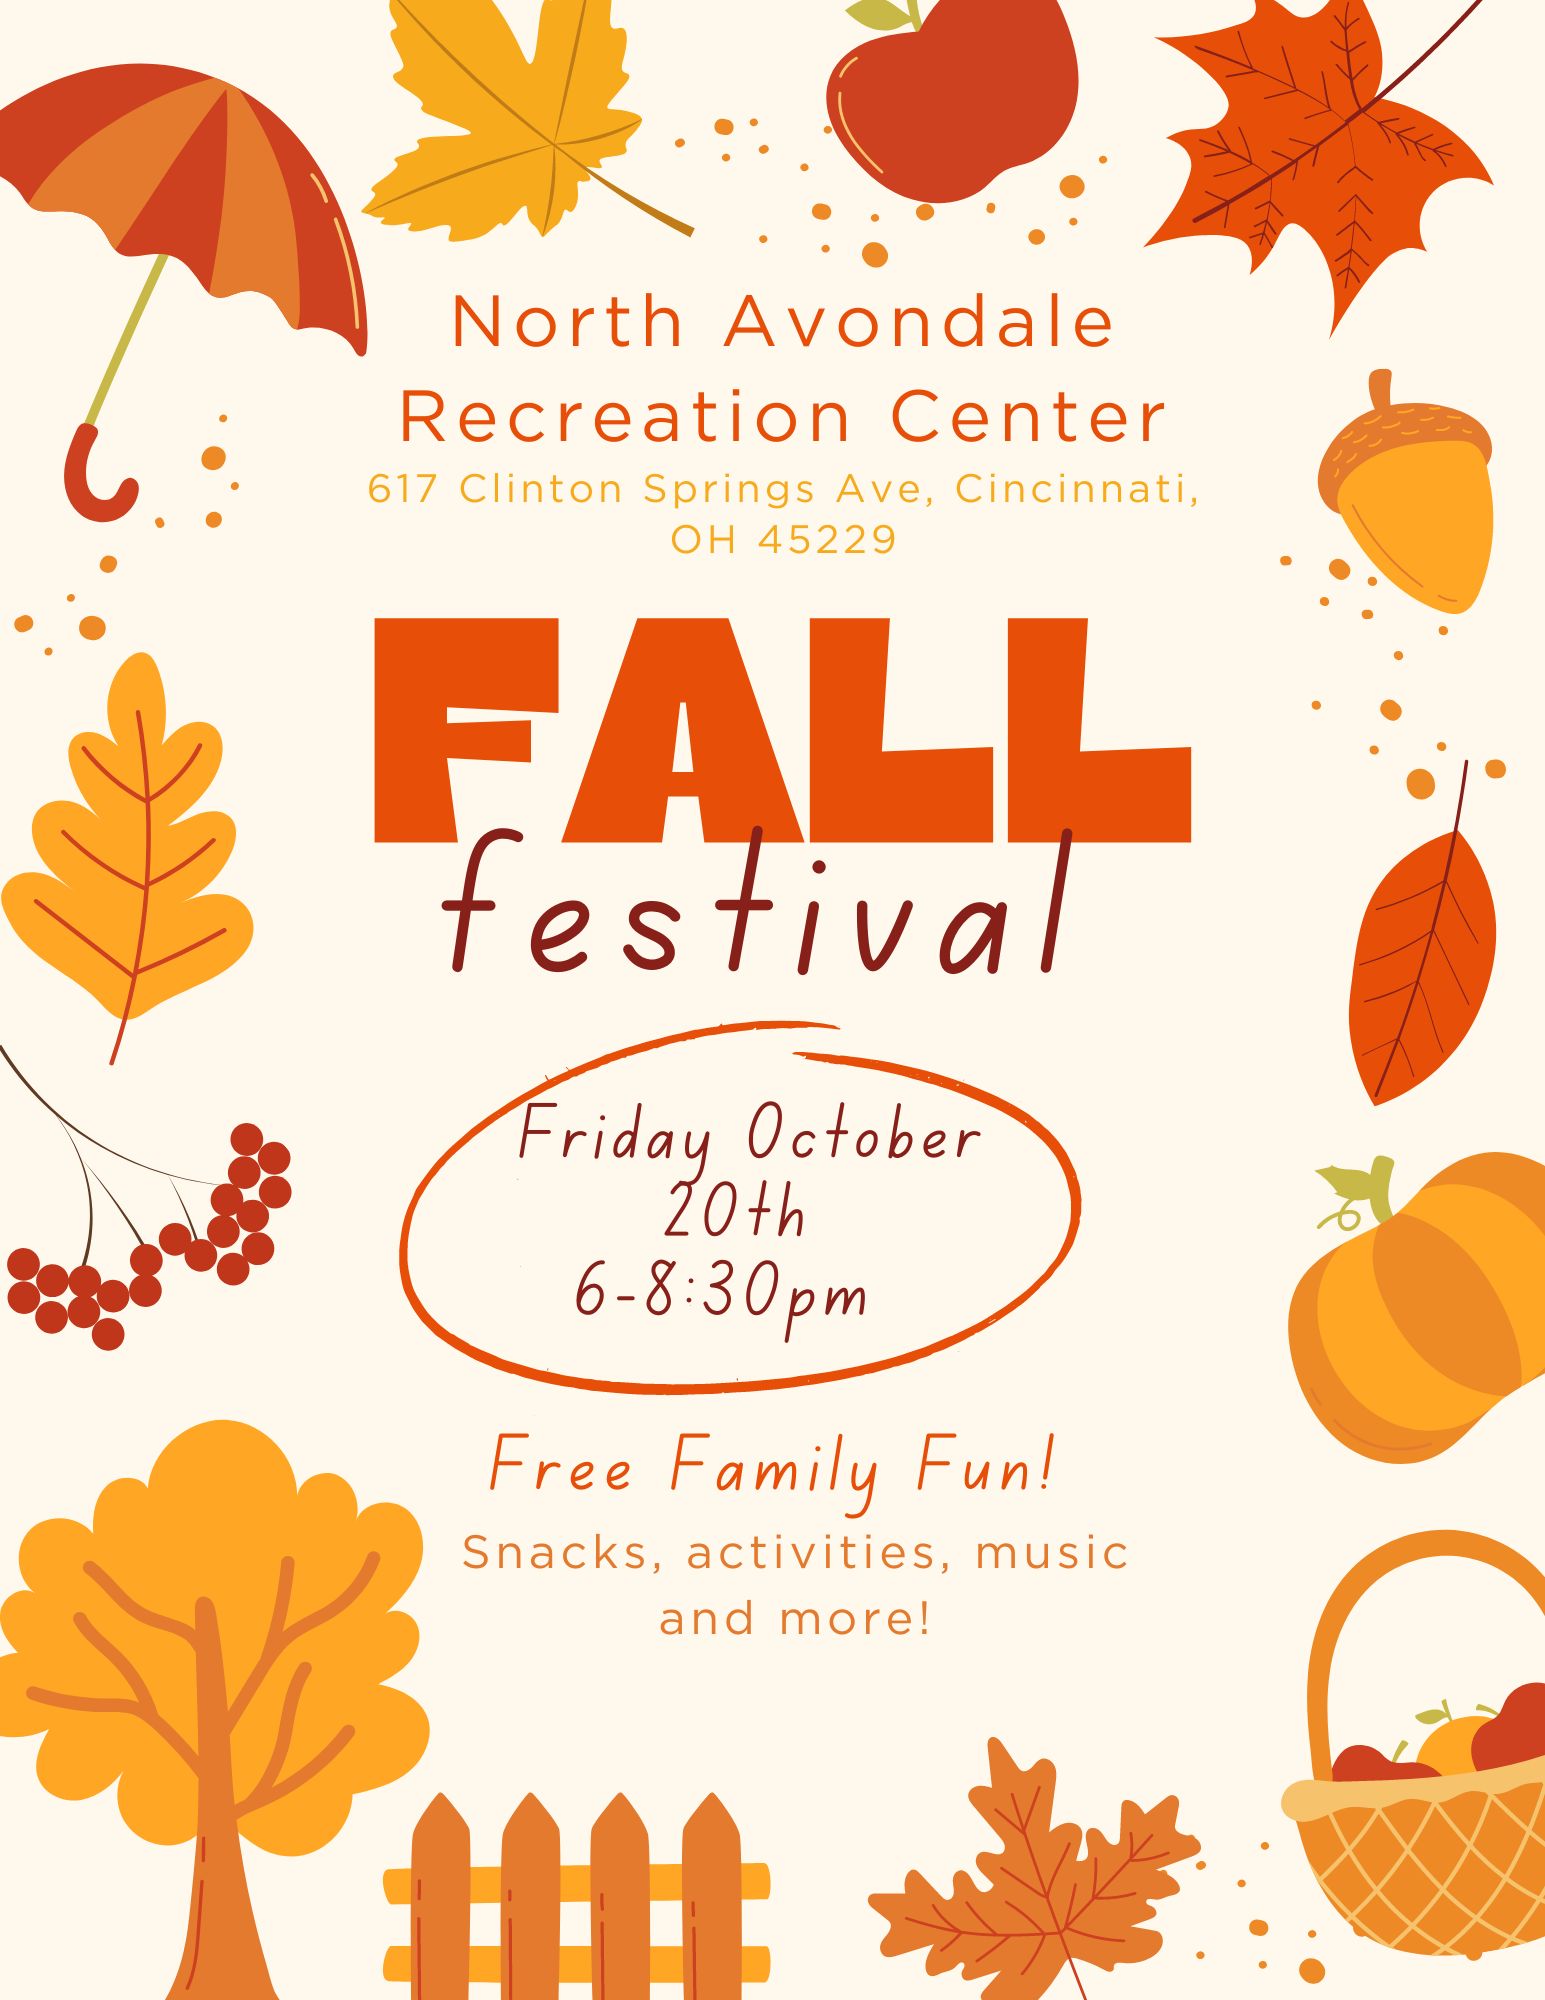 Free Fall Festival at North Avondale Recreation Center